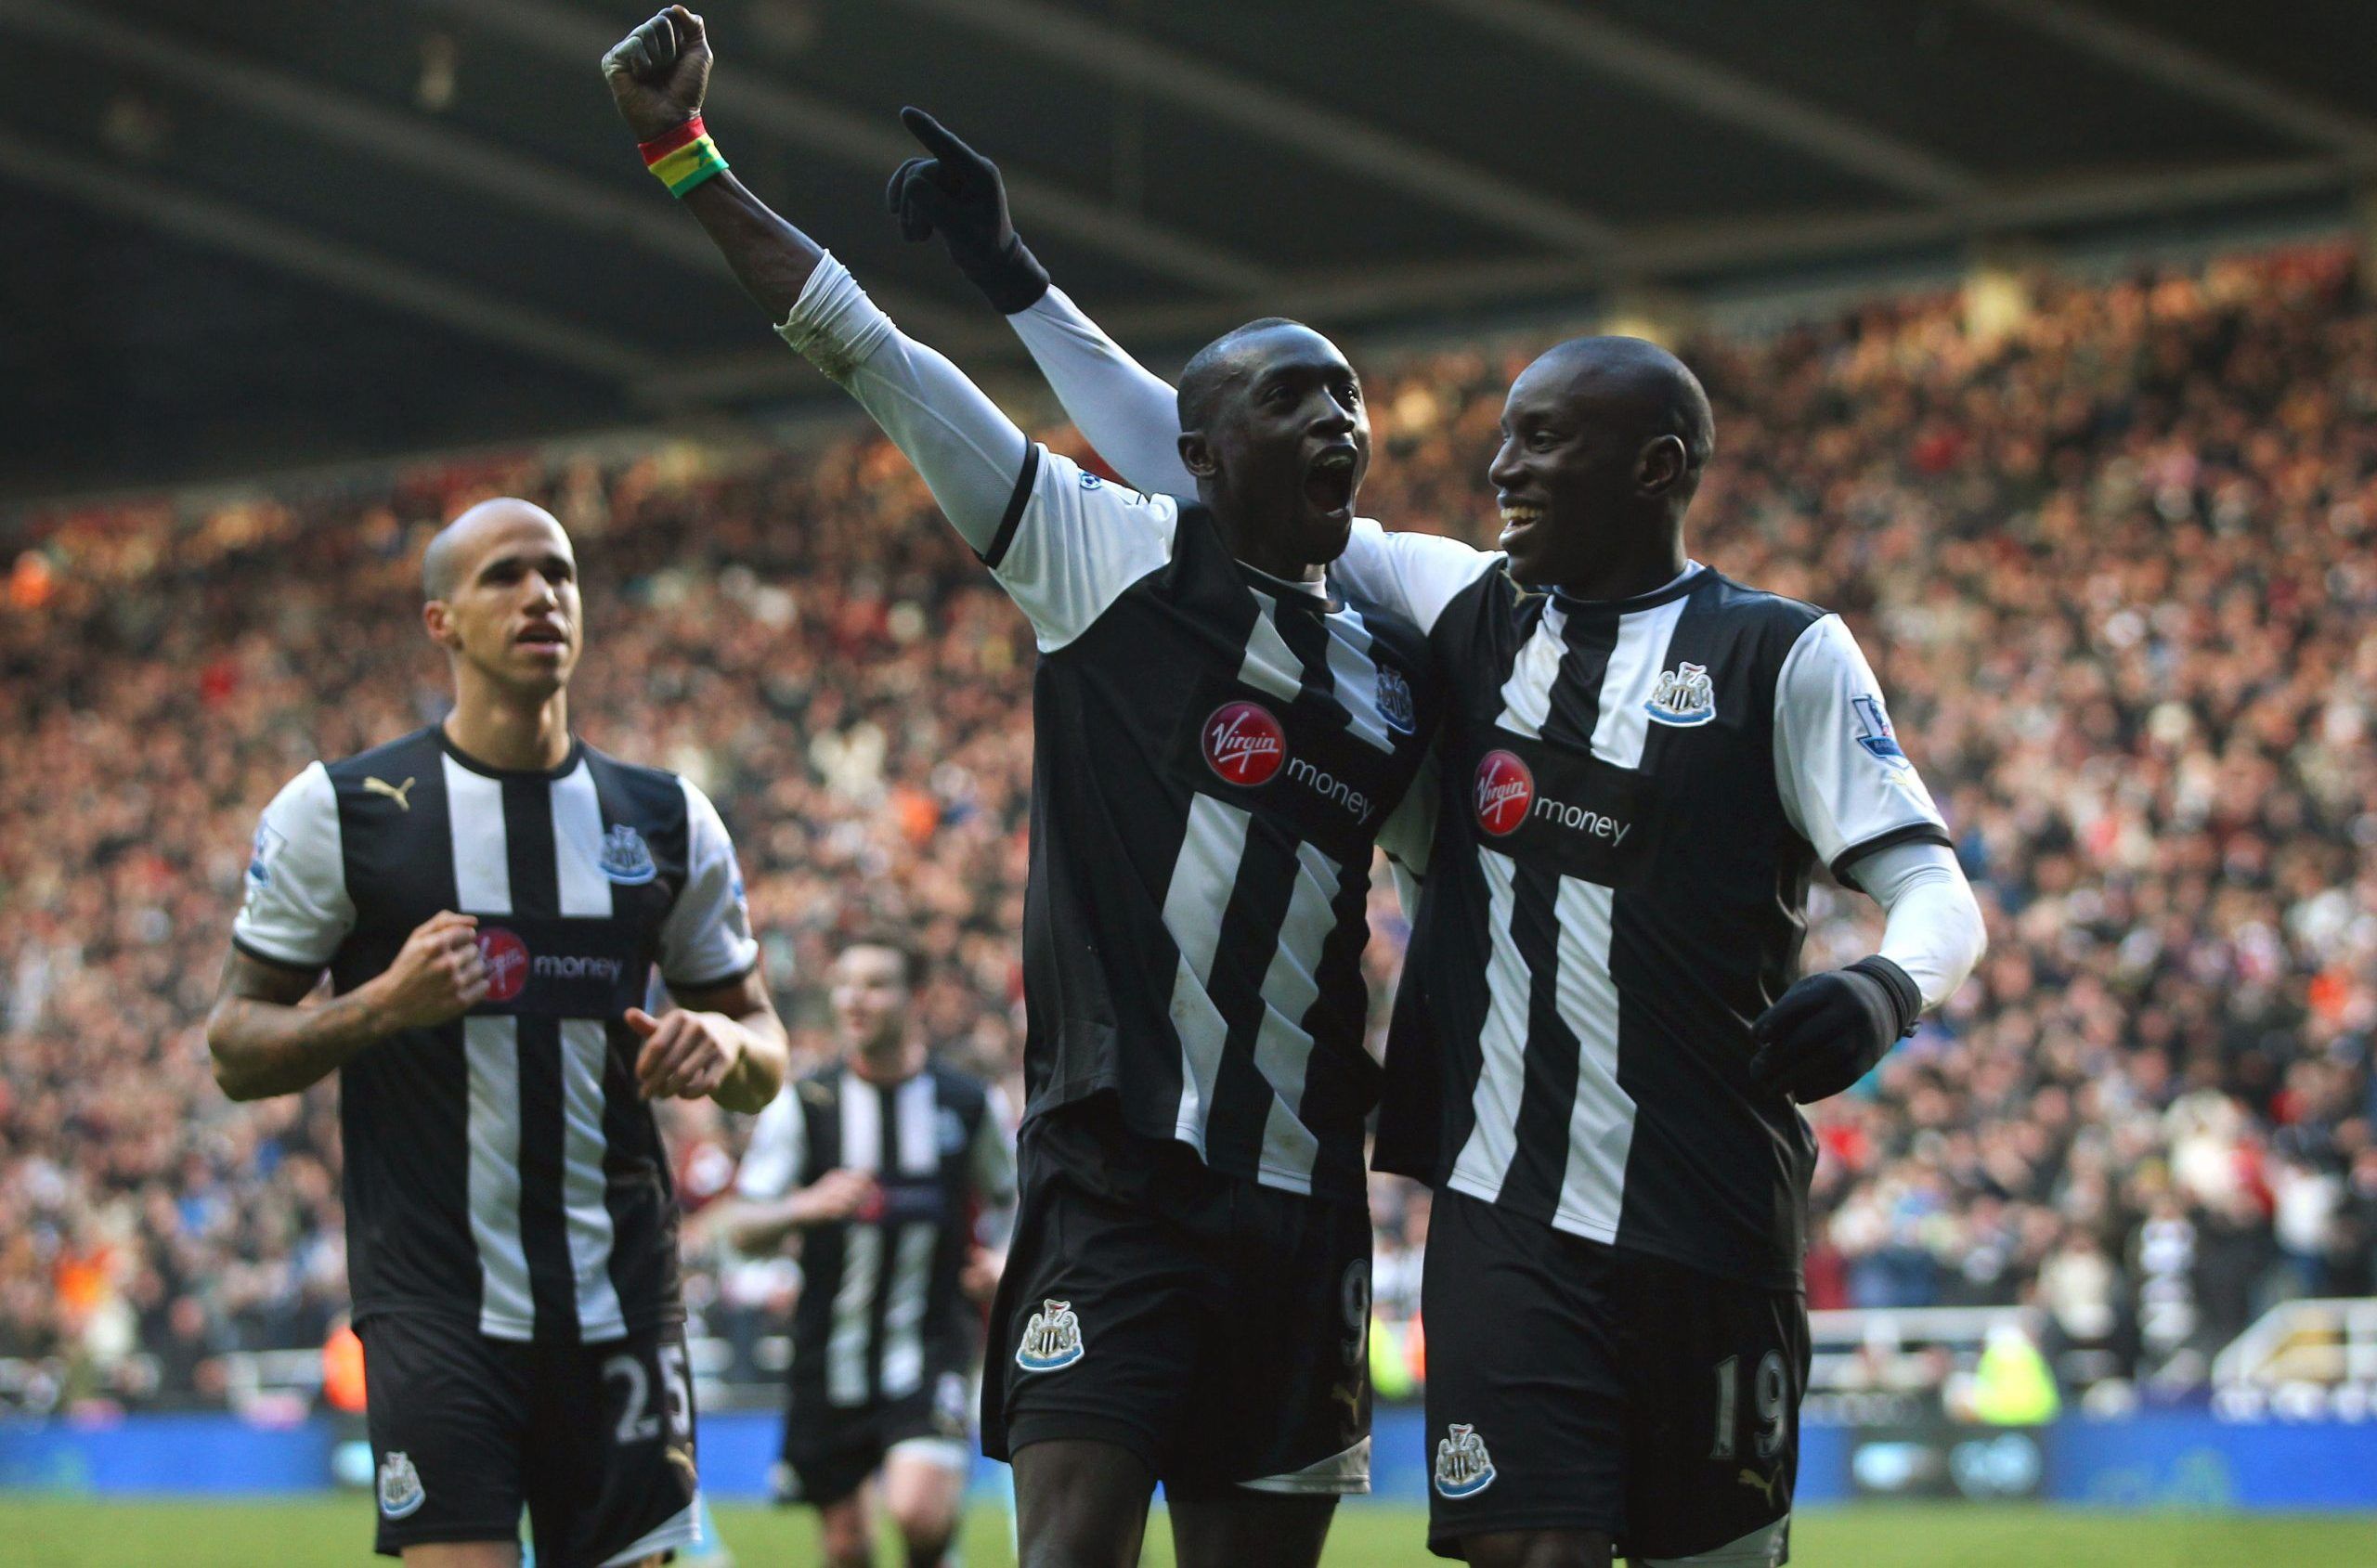 Football - Newcastle United v Aston Villa Barclays Premier League  - St James' Park - 5/2/12 
Papiss Cisse (L) celebrates with Demba Ba after scoring Newcastle's second goal 
Mandatory Credit: Action Images / Lee Smith 
Livepic 
EDITORIAL USE ONLY. No use with unauthorized audio, video, data, fixture lists, club/league logos or live services. Online in-match use limited to 45 images, no video emulation. No use in betting, games or single club/league/player publications.  Please contact your acco